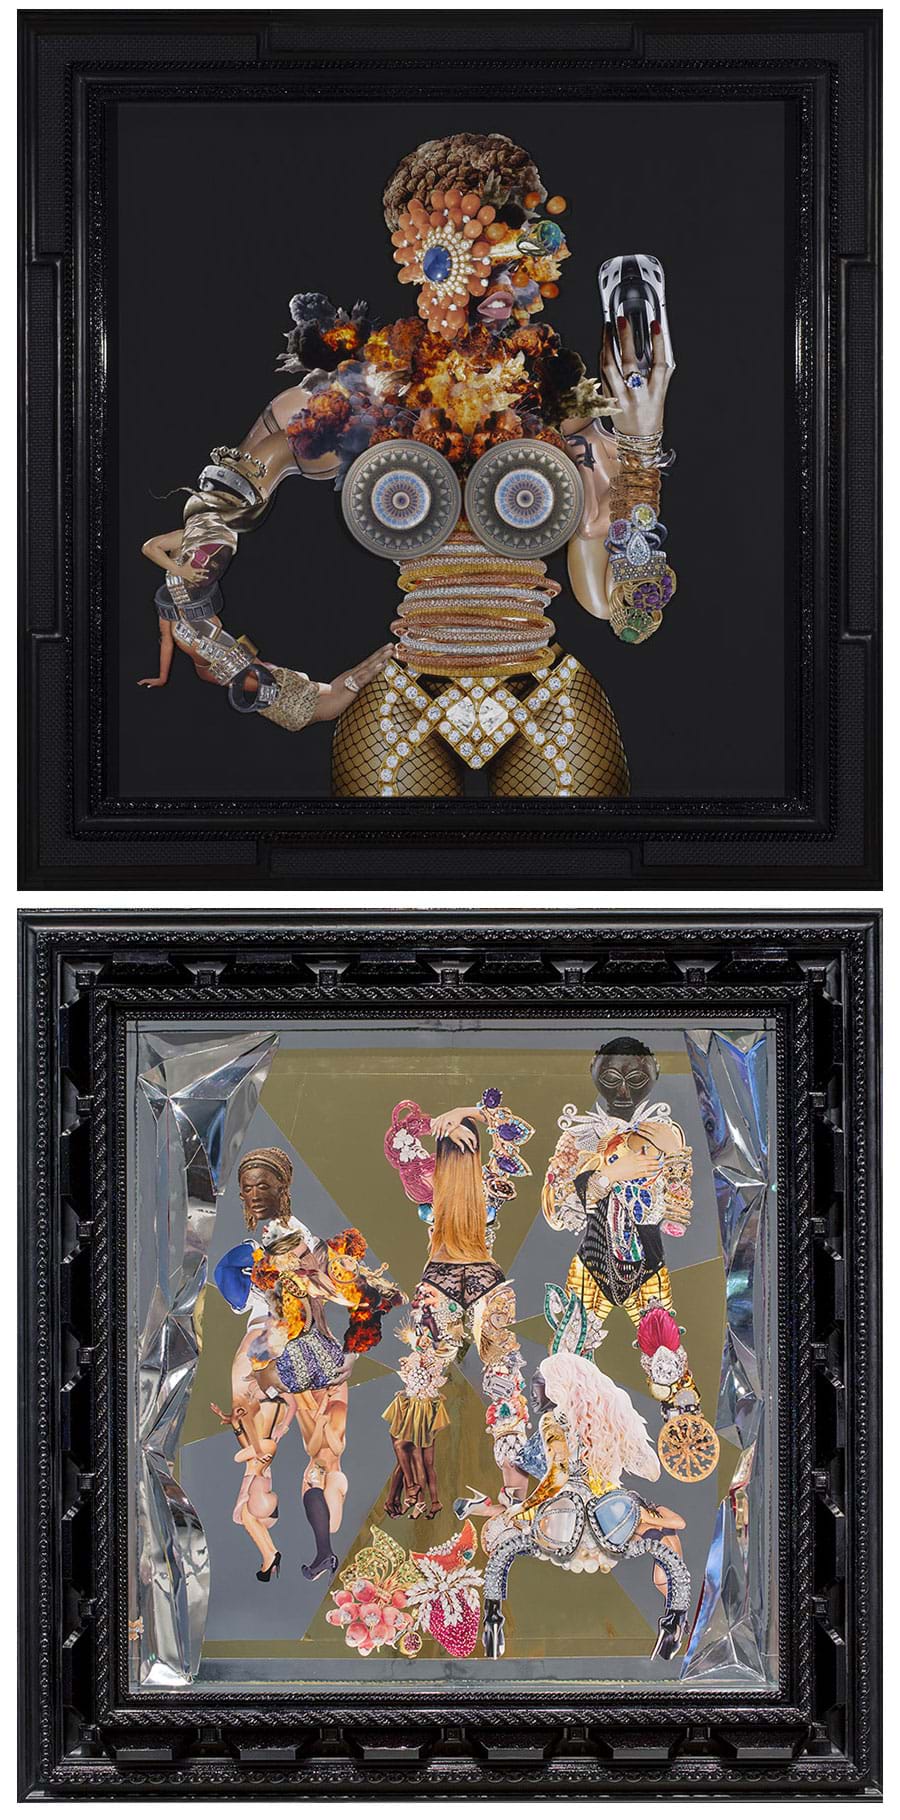 Rashaad Newsome | #1st Place, 2016 | Collage in custom frame with leather and automotive paint | Look Back at It, 2016 | Collage in custom frame with leather and automotive paint